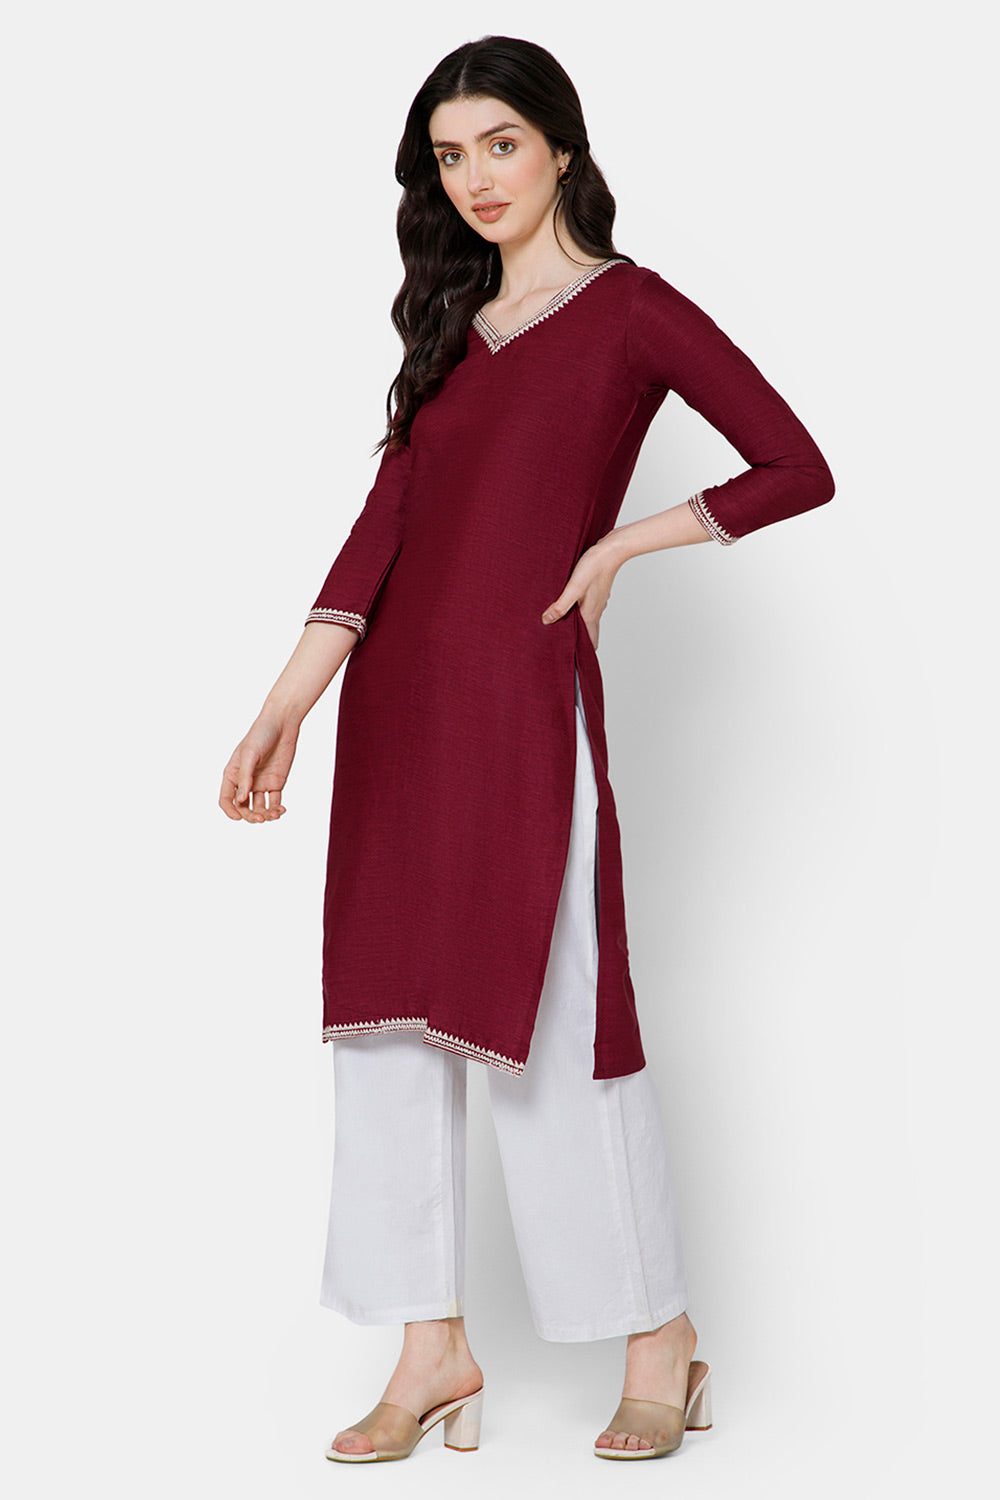 Mythri Women's Casual Kurthi with Minimalistic Embroidery At The Neckline - Red - E076